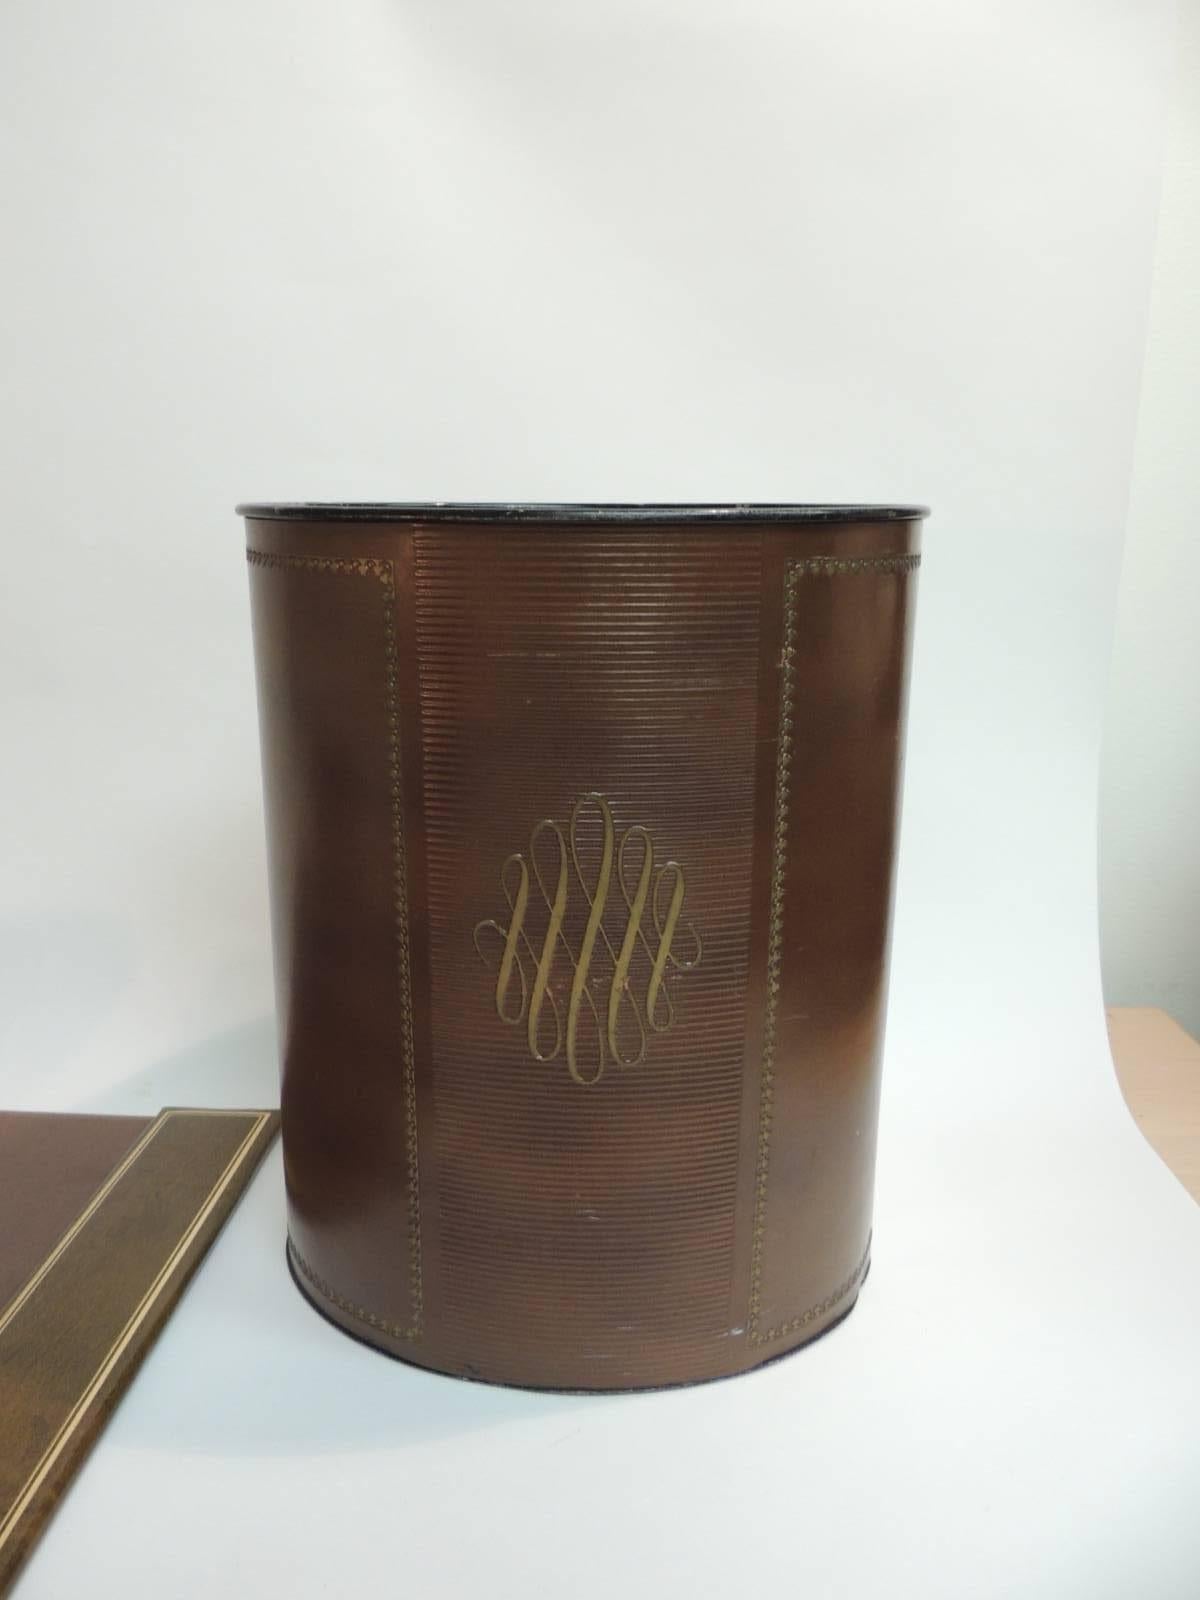 Offered by the Antique Textiles Galleries:
Set of vintage embossed brown letter office desk set. Top grain cowhide brown leather embossed with gold leaf details. Set includes:
Pair of heavy bookends: 2.5 x 4 x 6H
Waste basket metal wrapped in